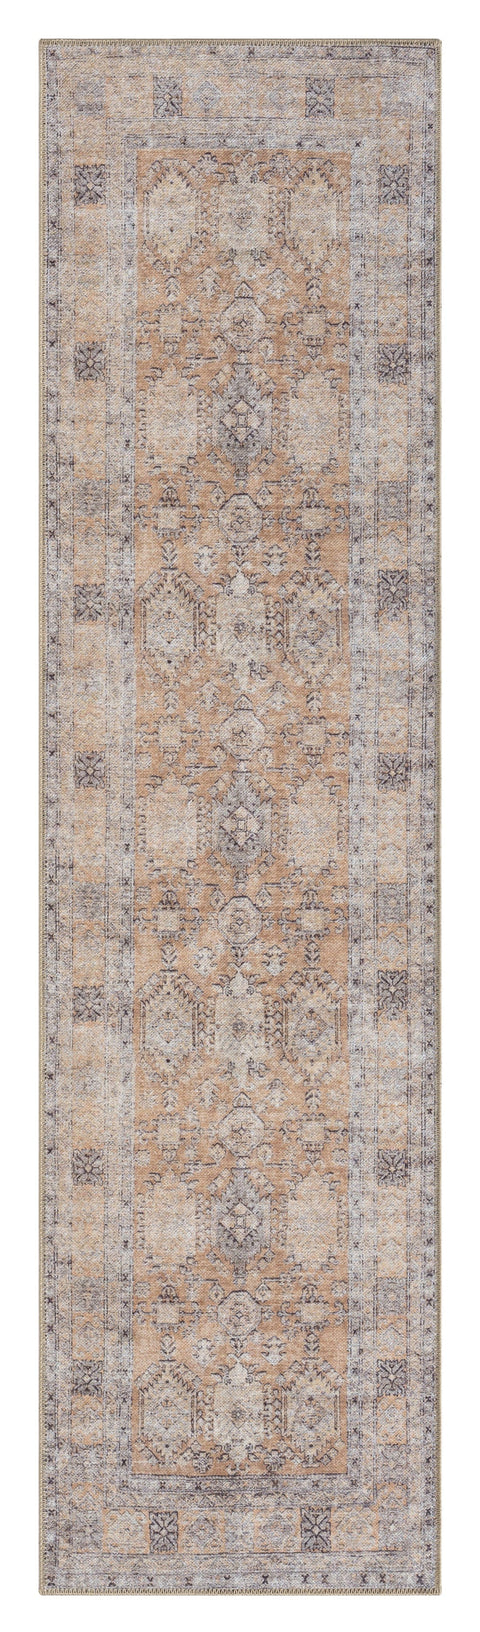 Sydelle Brown and Grey Traditional Distressed Washable Runner Rug